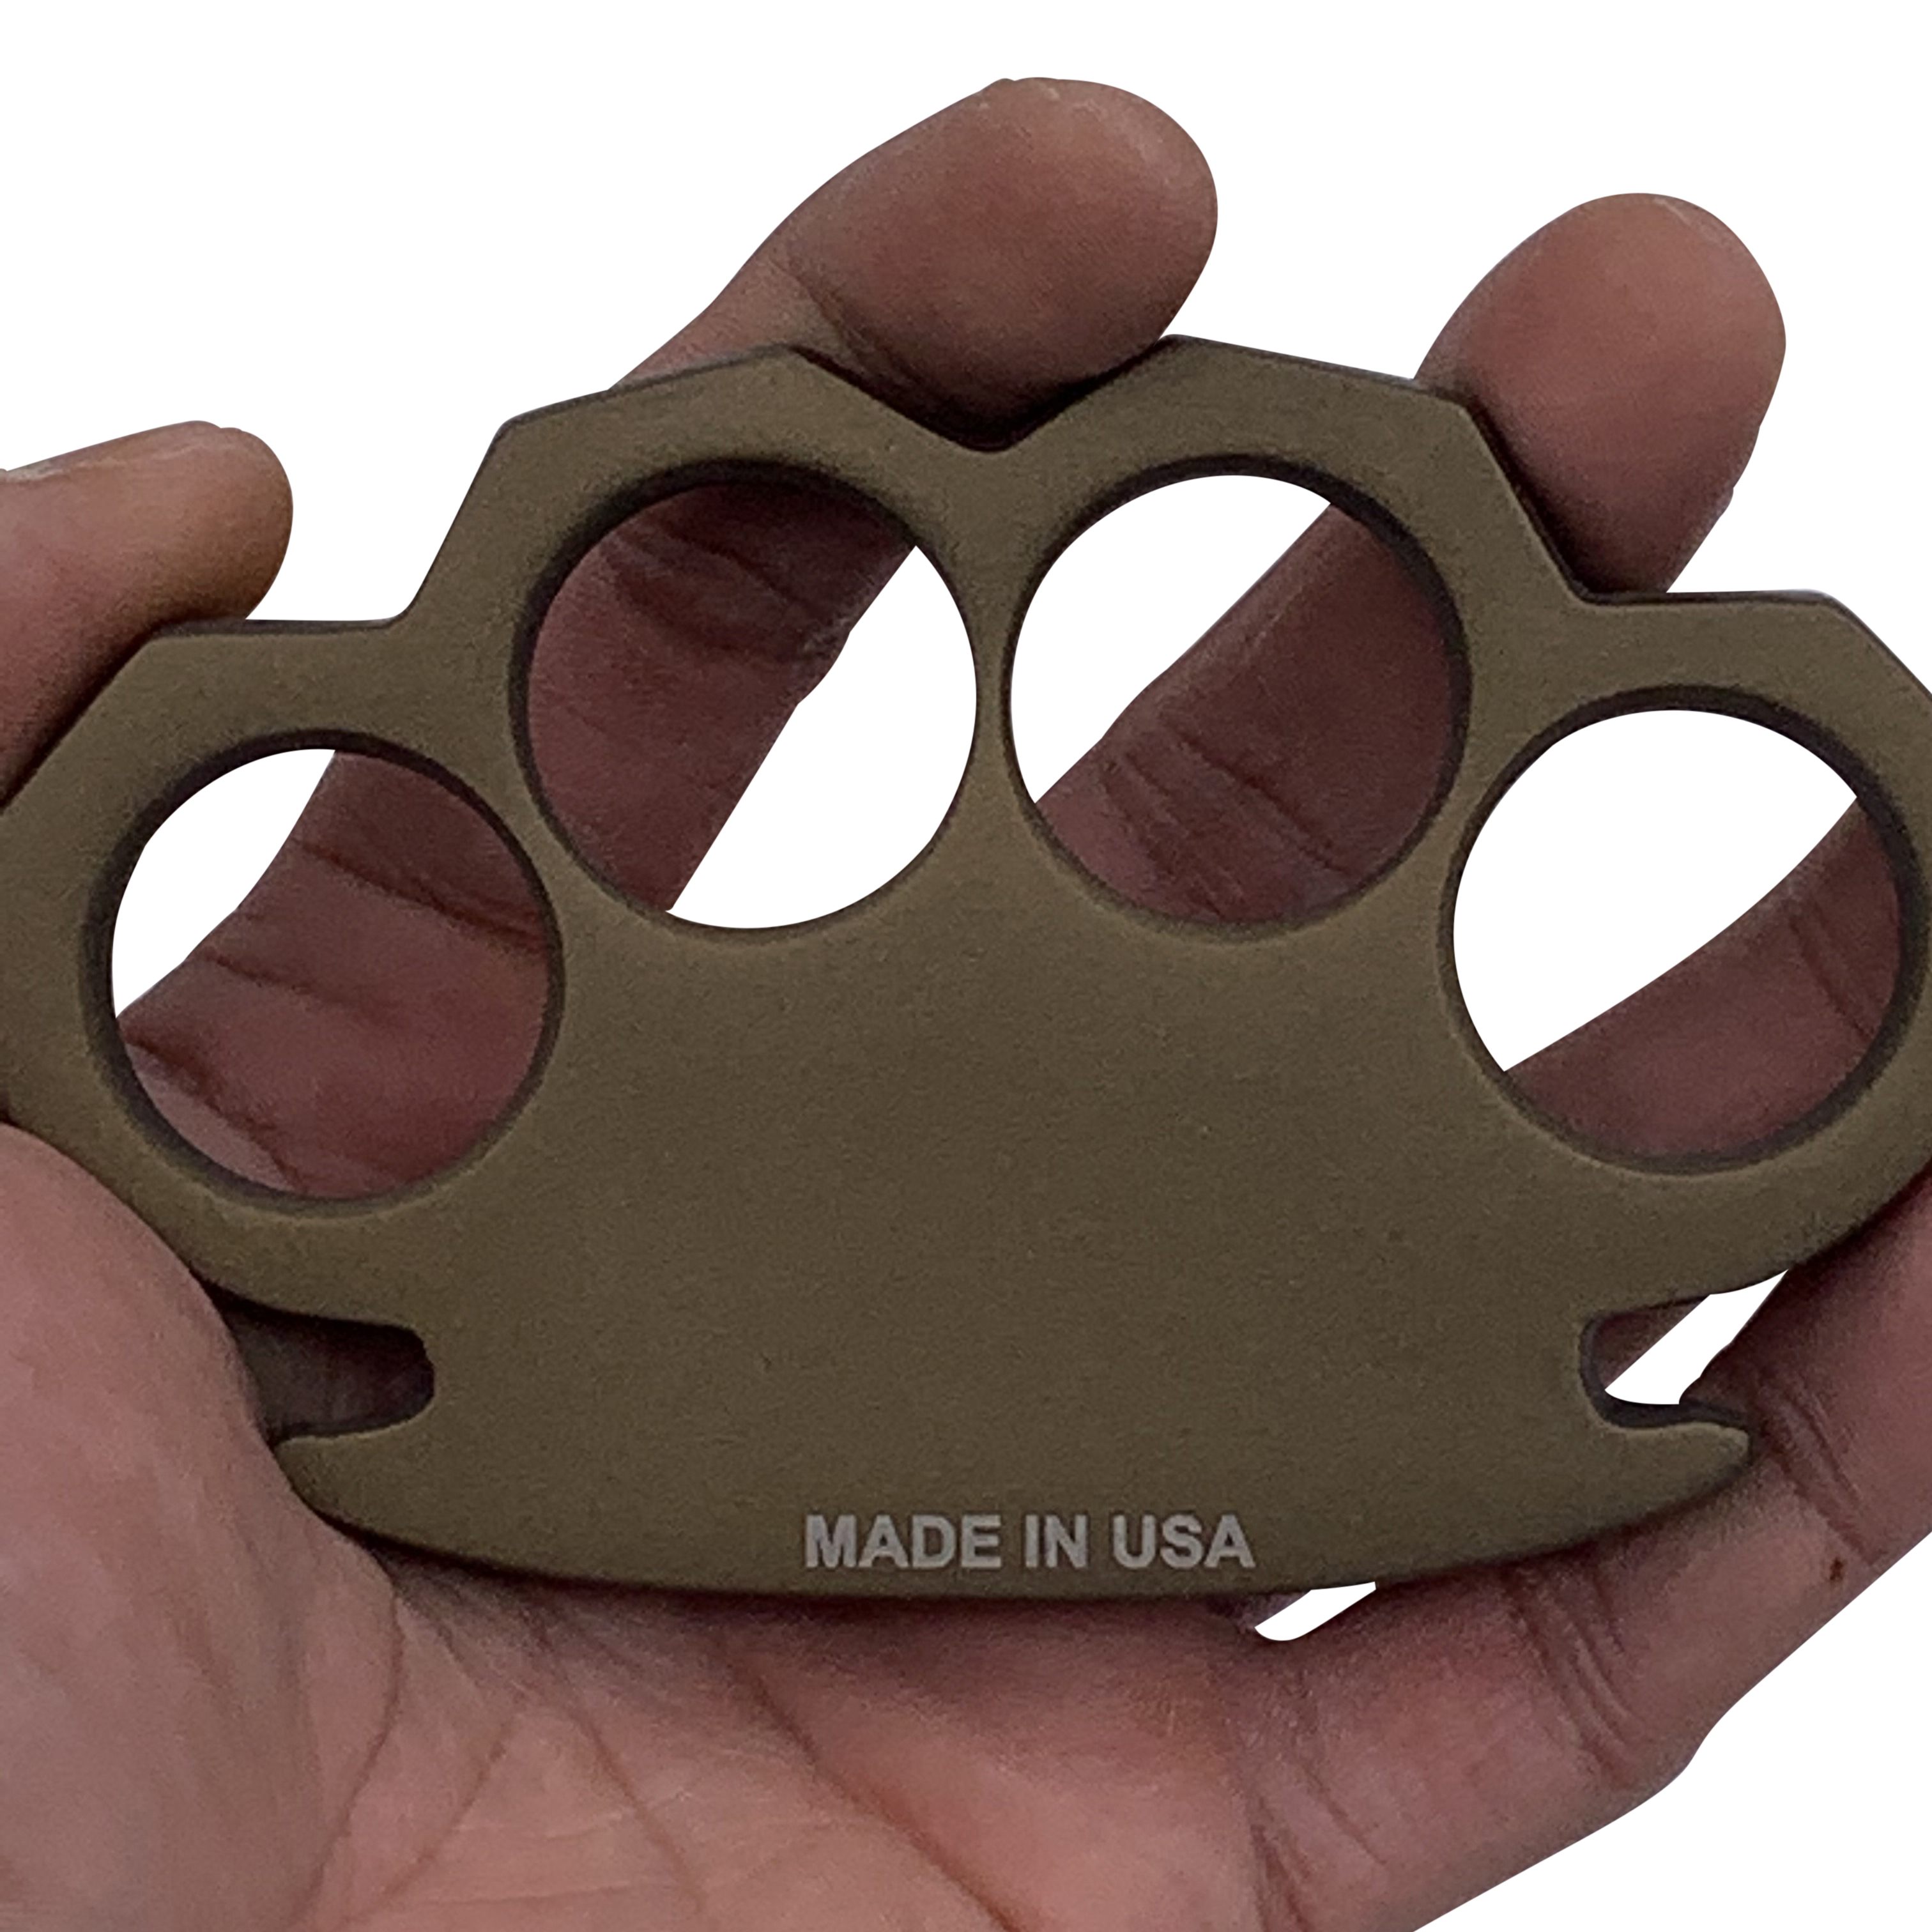 CI 300 P MBR 1 Cerakote Made in USA Brass Knuckles Military Brown